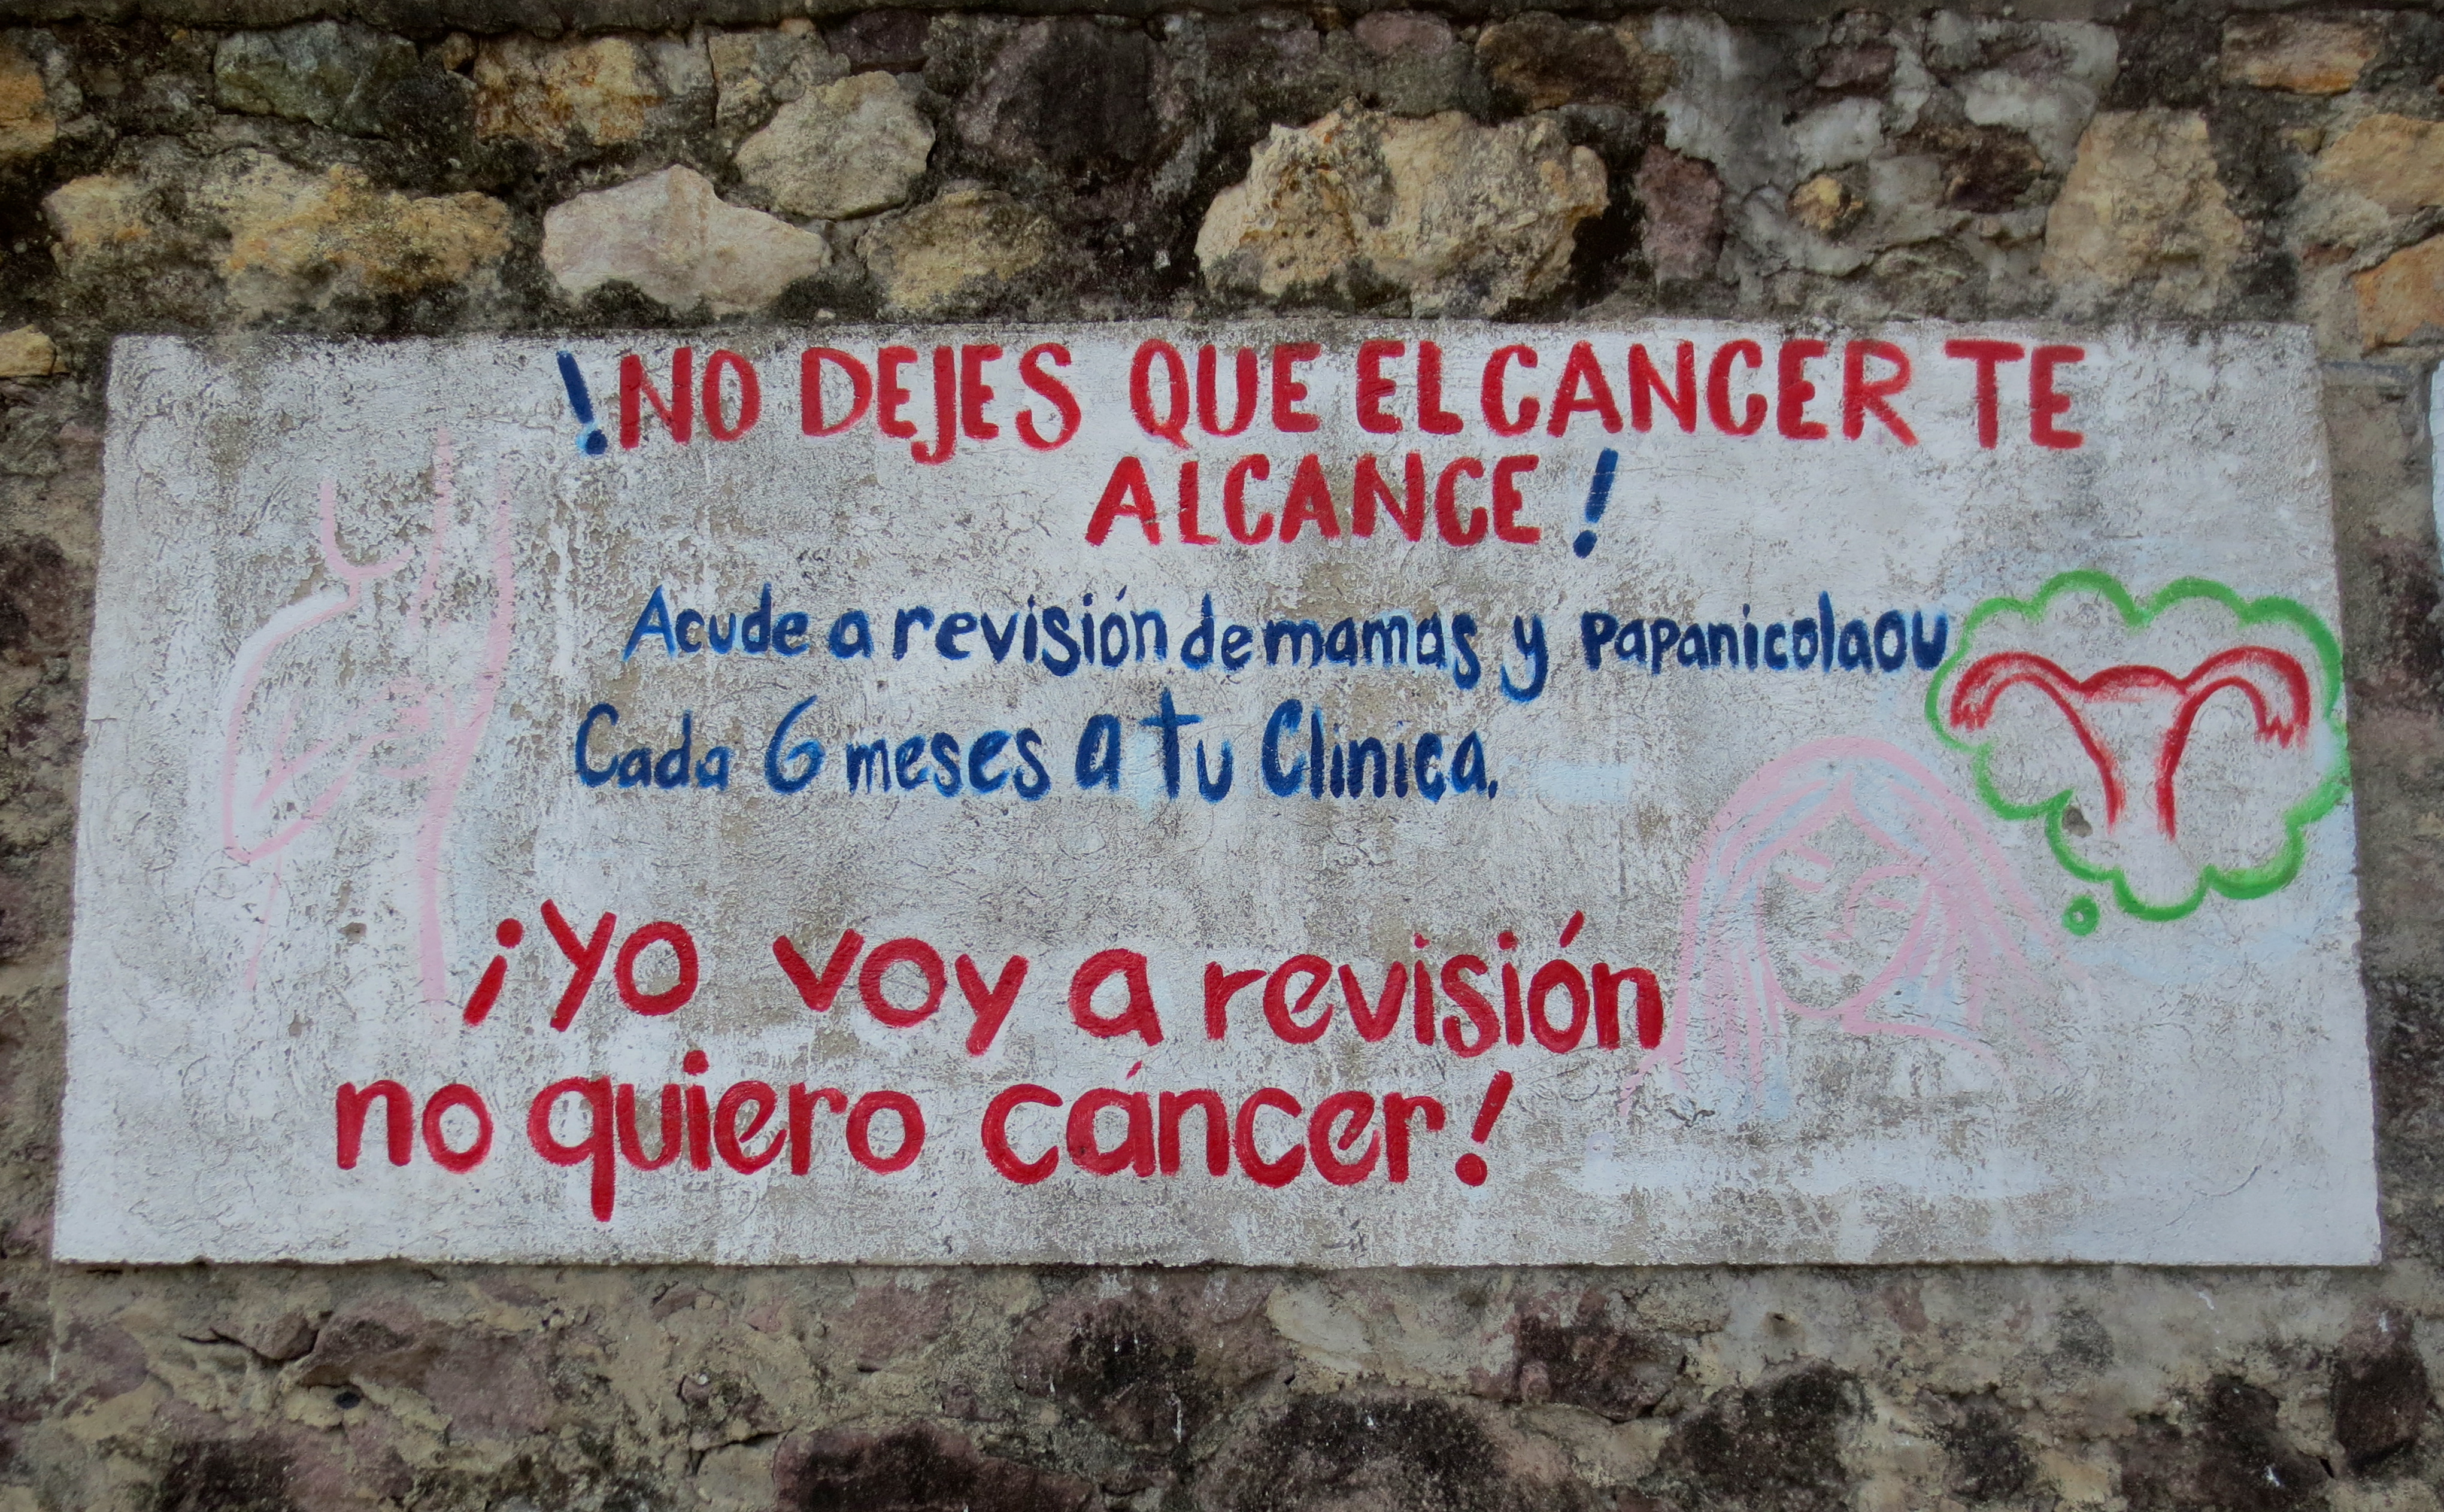 Translation: Do not allow the cancer to reach you! Go to your clinic every six months for a breast exam and pap smear